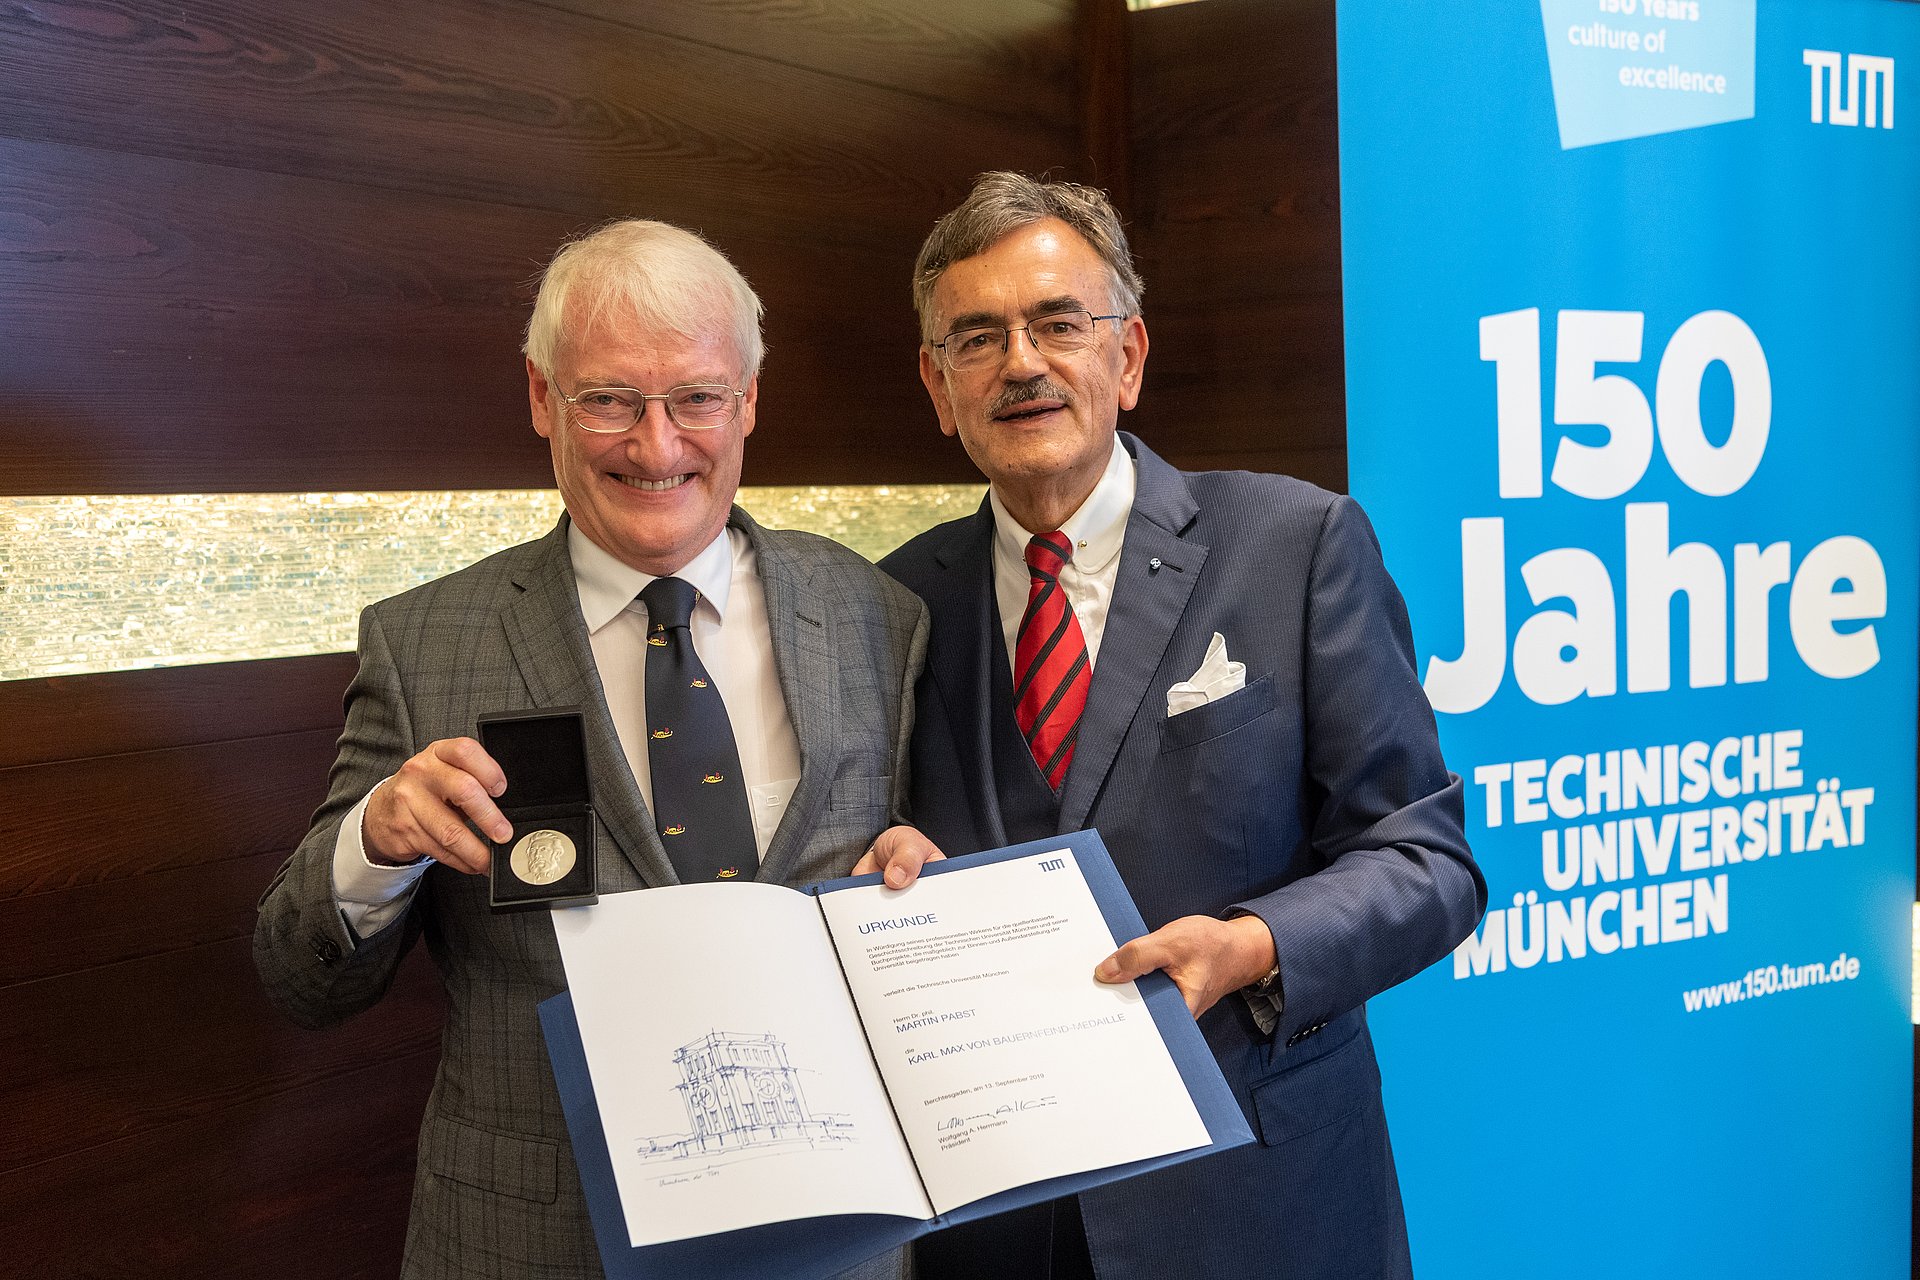 TUM President Prof. Wolfgang A. Herrmann (r.) presents Dr. Martin Pabst with the Karl Max von Bauernfeind Medal.